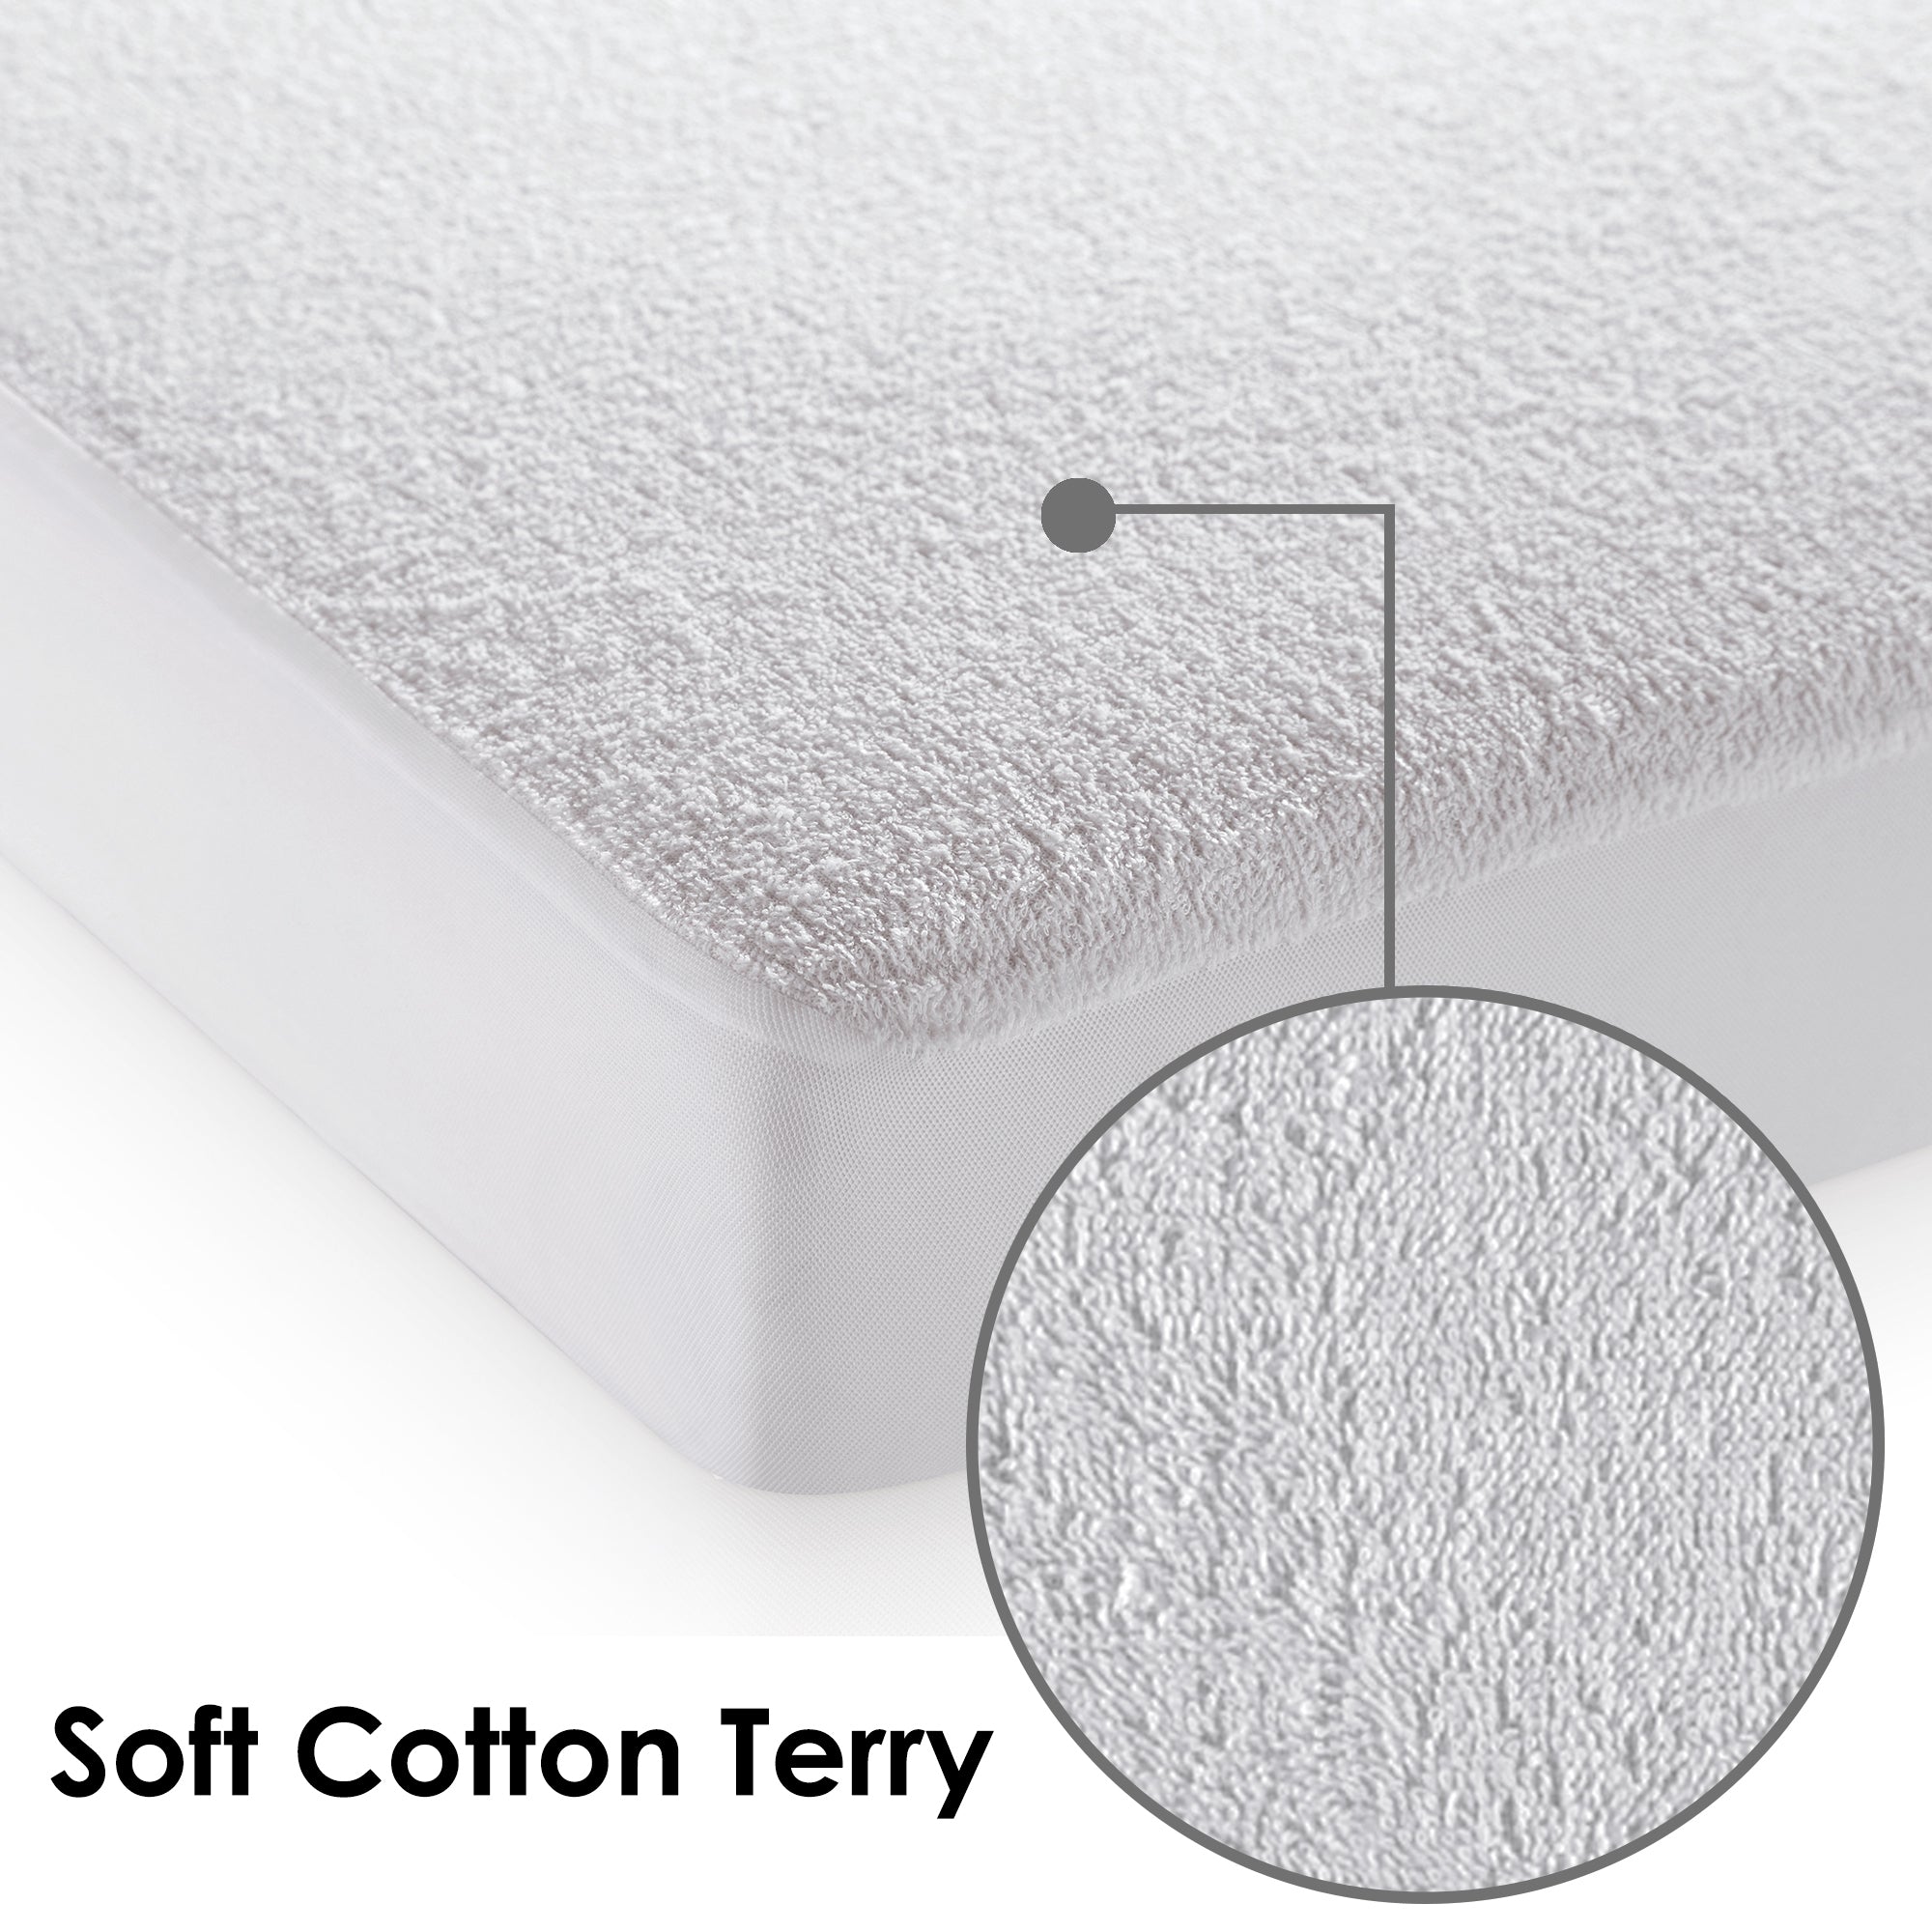 Story@Home Terry 100% Waterproof and Dustproof Premium Single / Double / King Size Mattress Protector